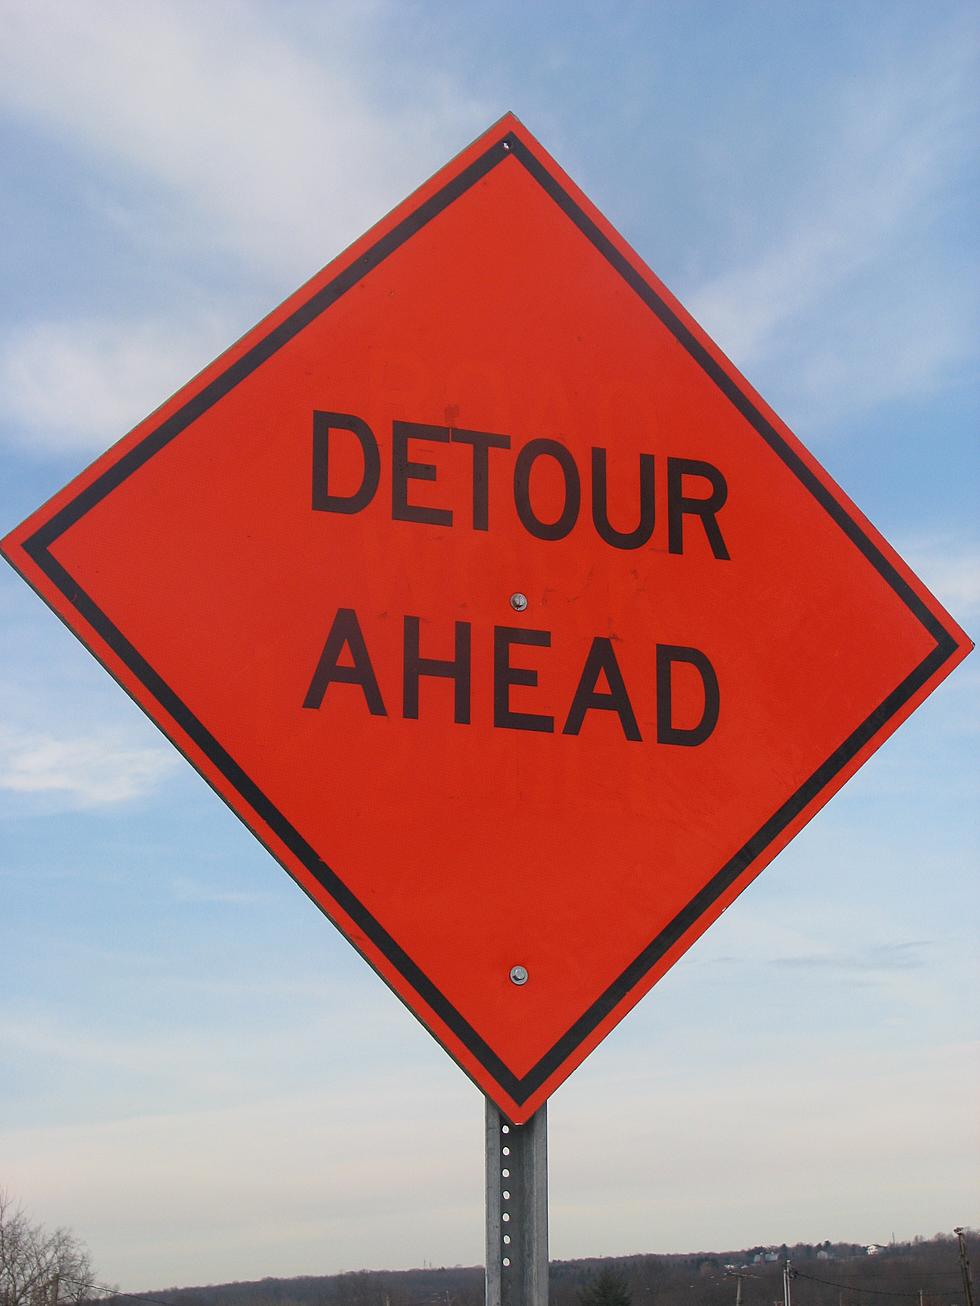 NY State DOT Officials Say Stop Ignoring State Route 28 Detour